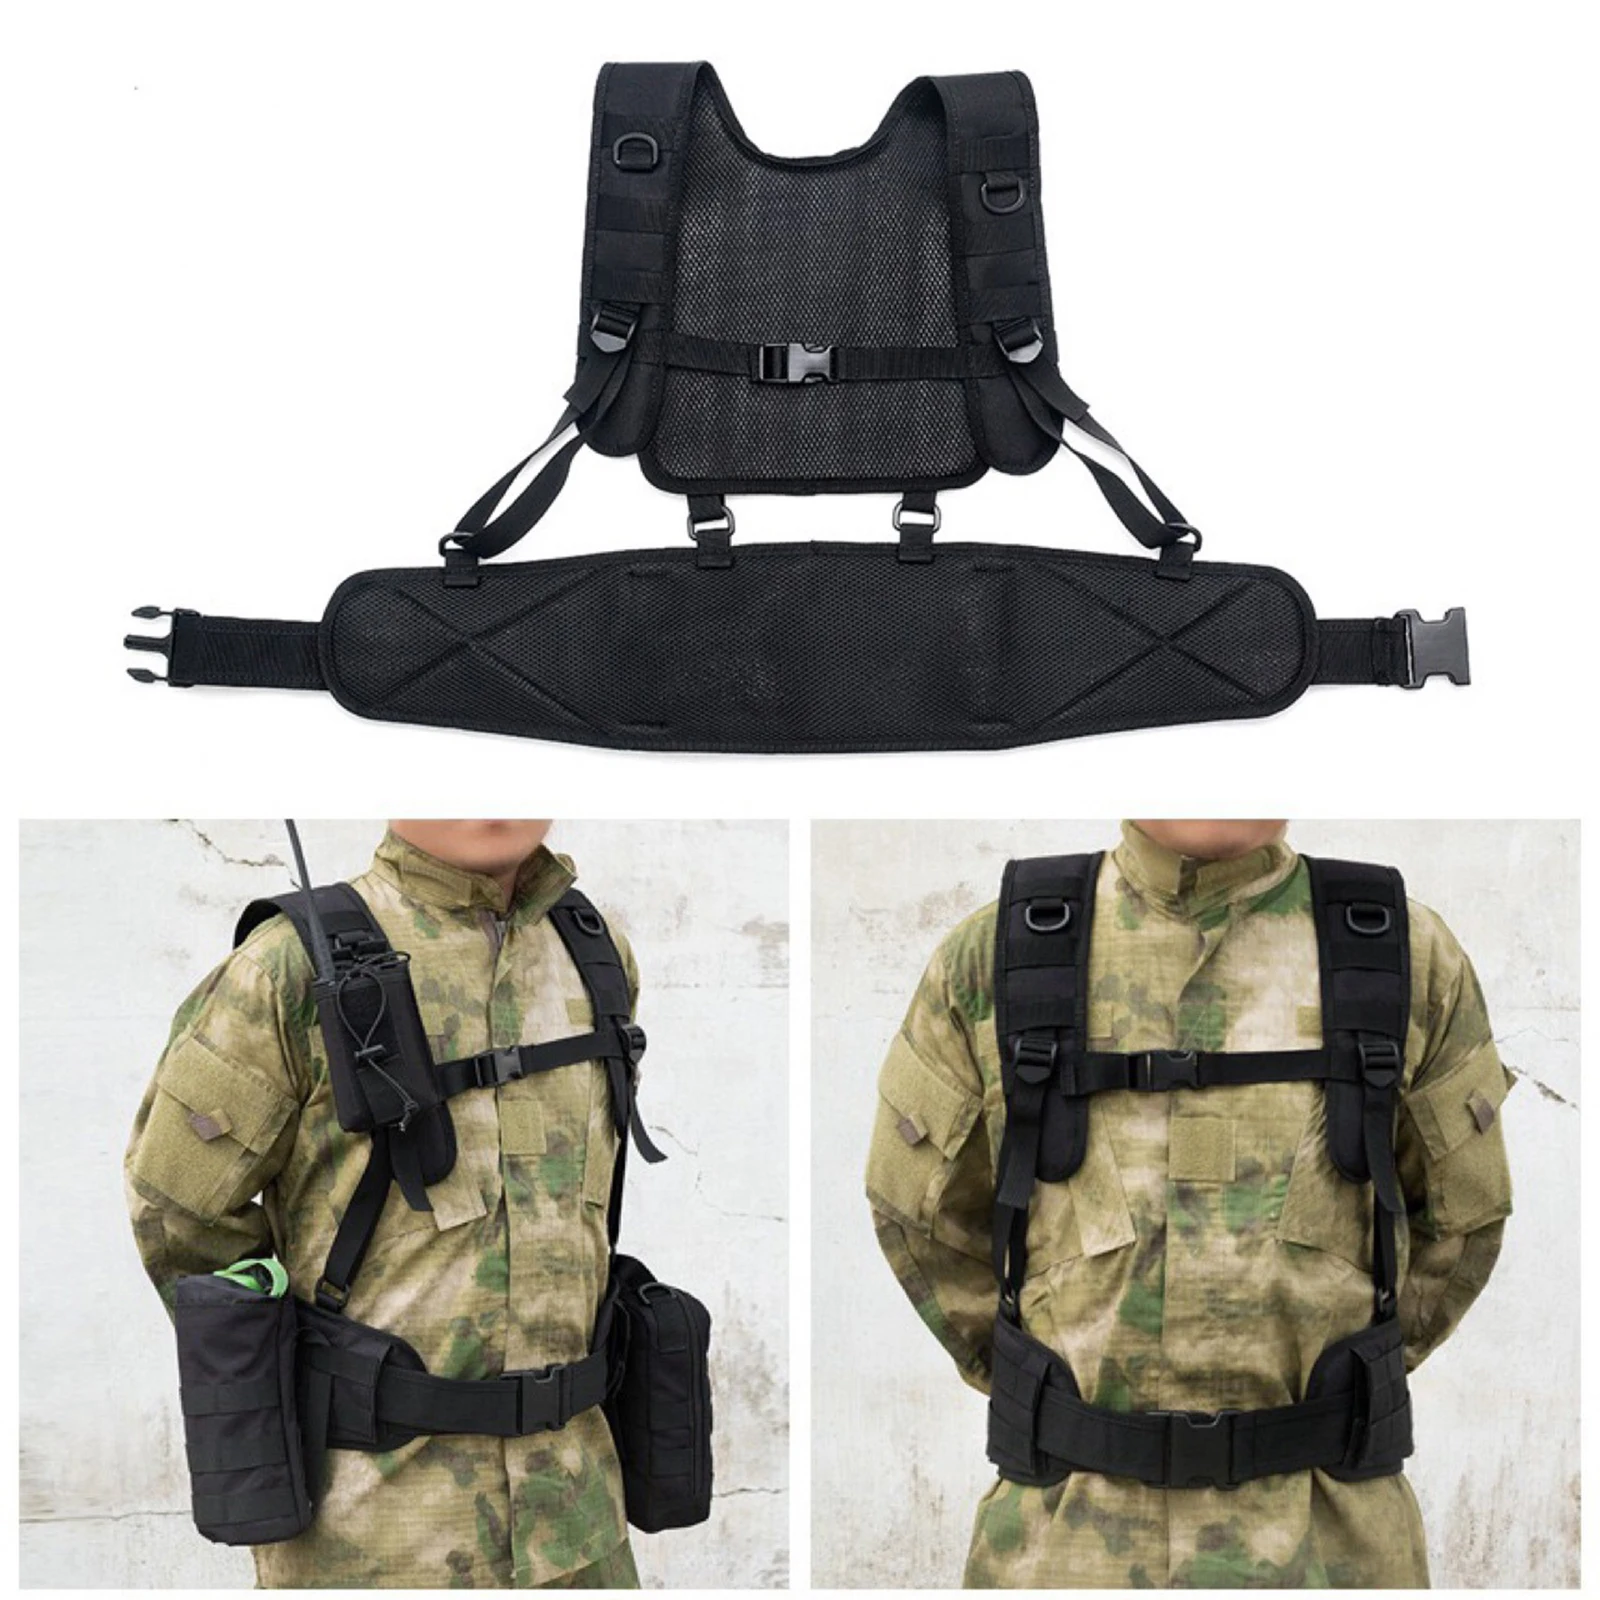 Vest Outdoor Ultra-light Breathable Modular Vest for Special Mission Training Field and Camping Hunting Fishing Hiking